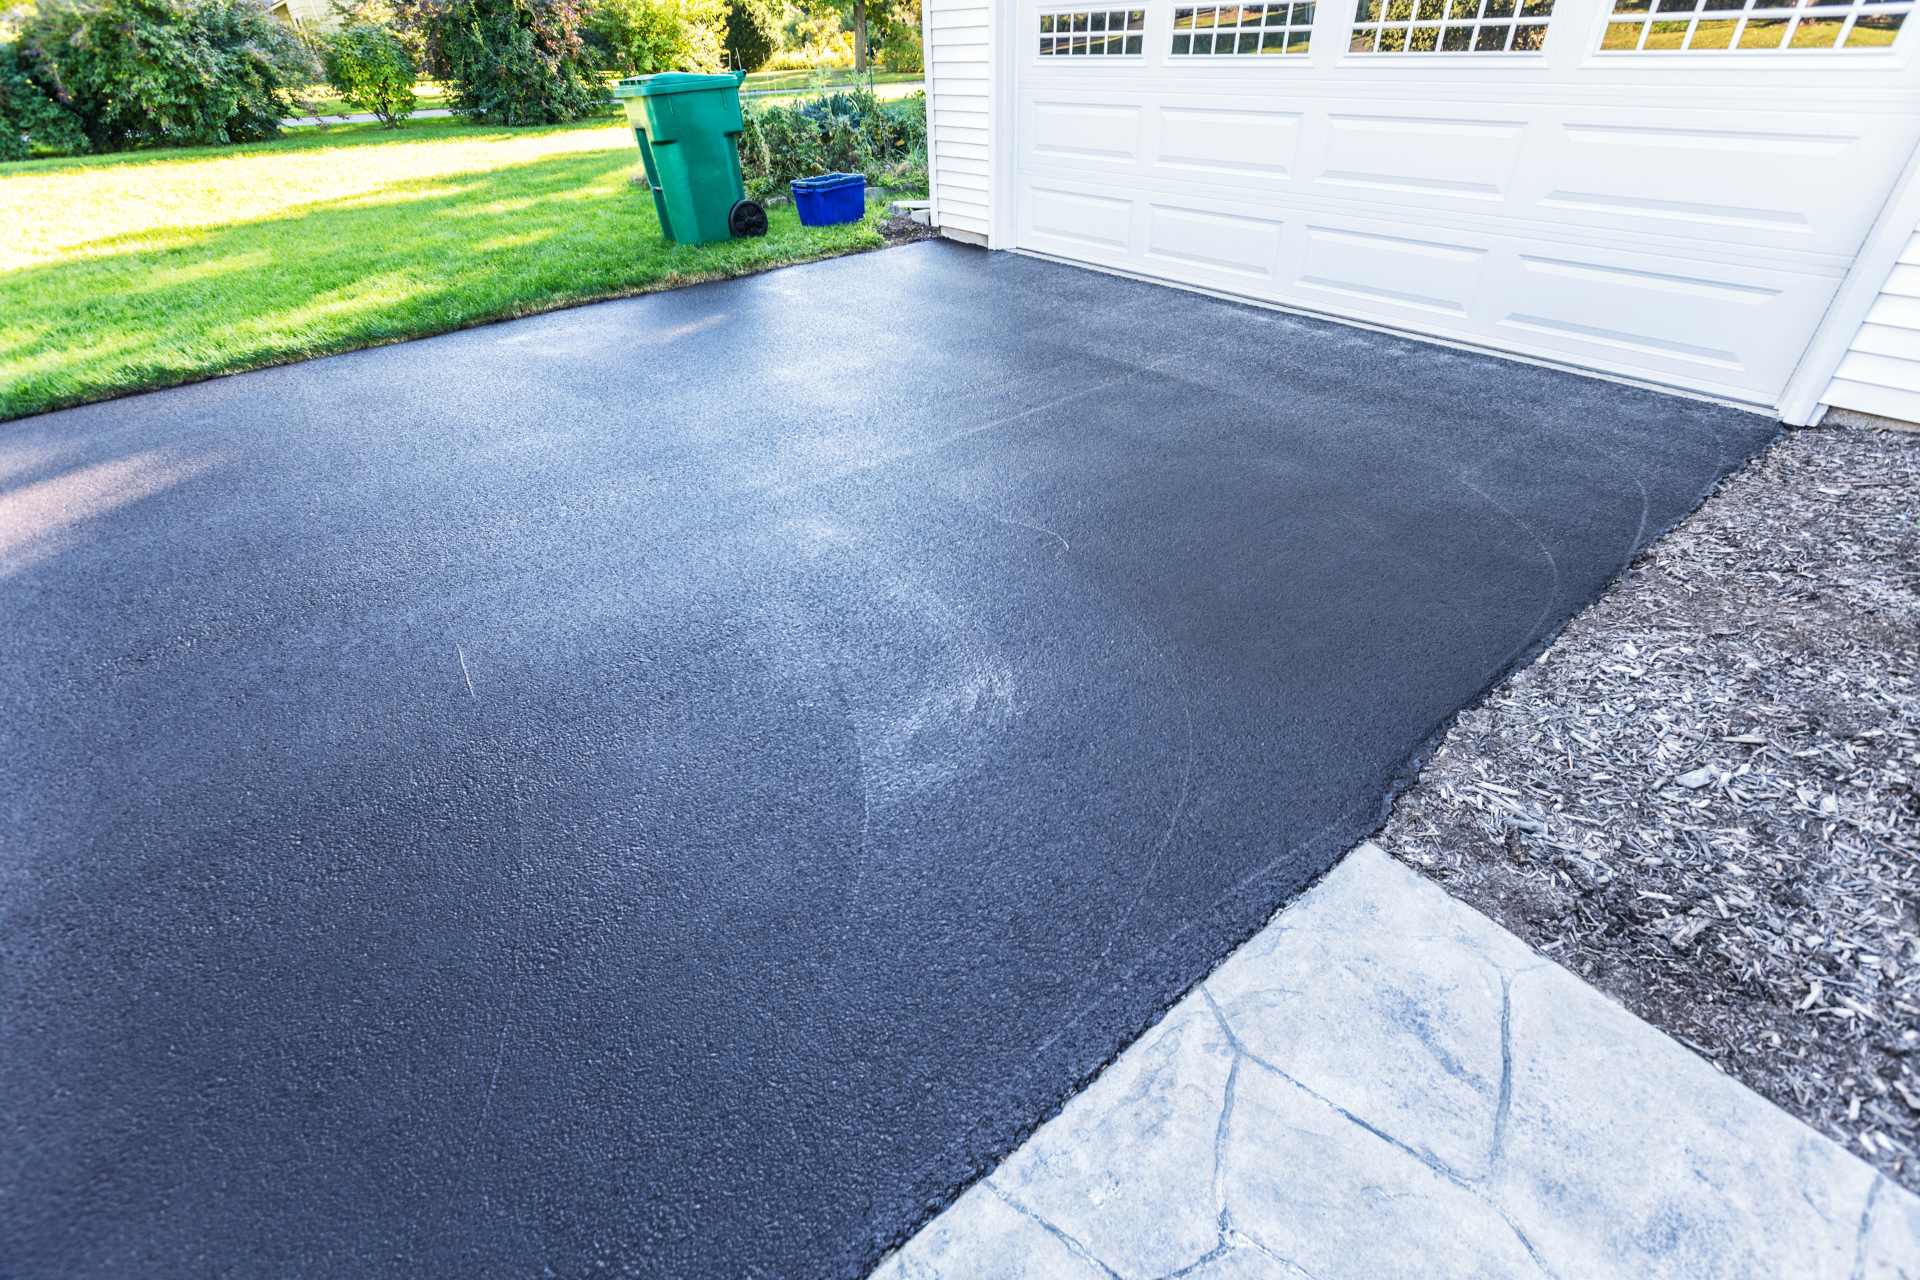 5 Common Asphalt Driveway Problems and How to Fix Them